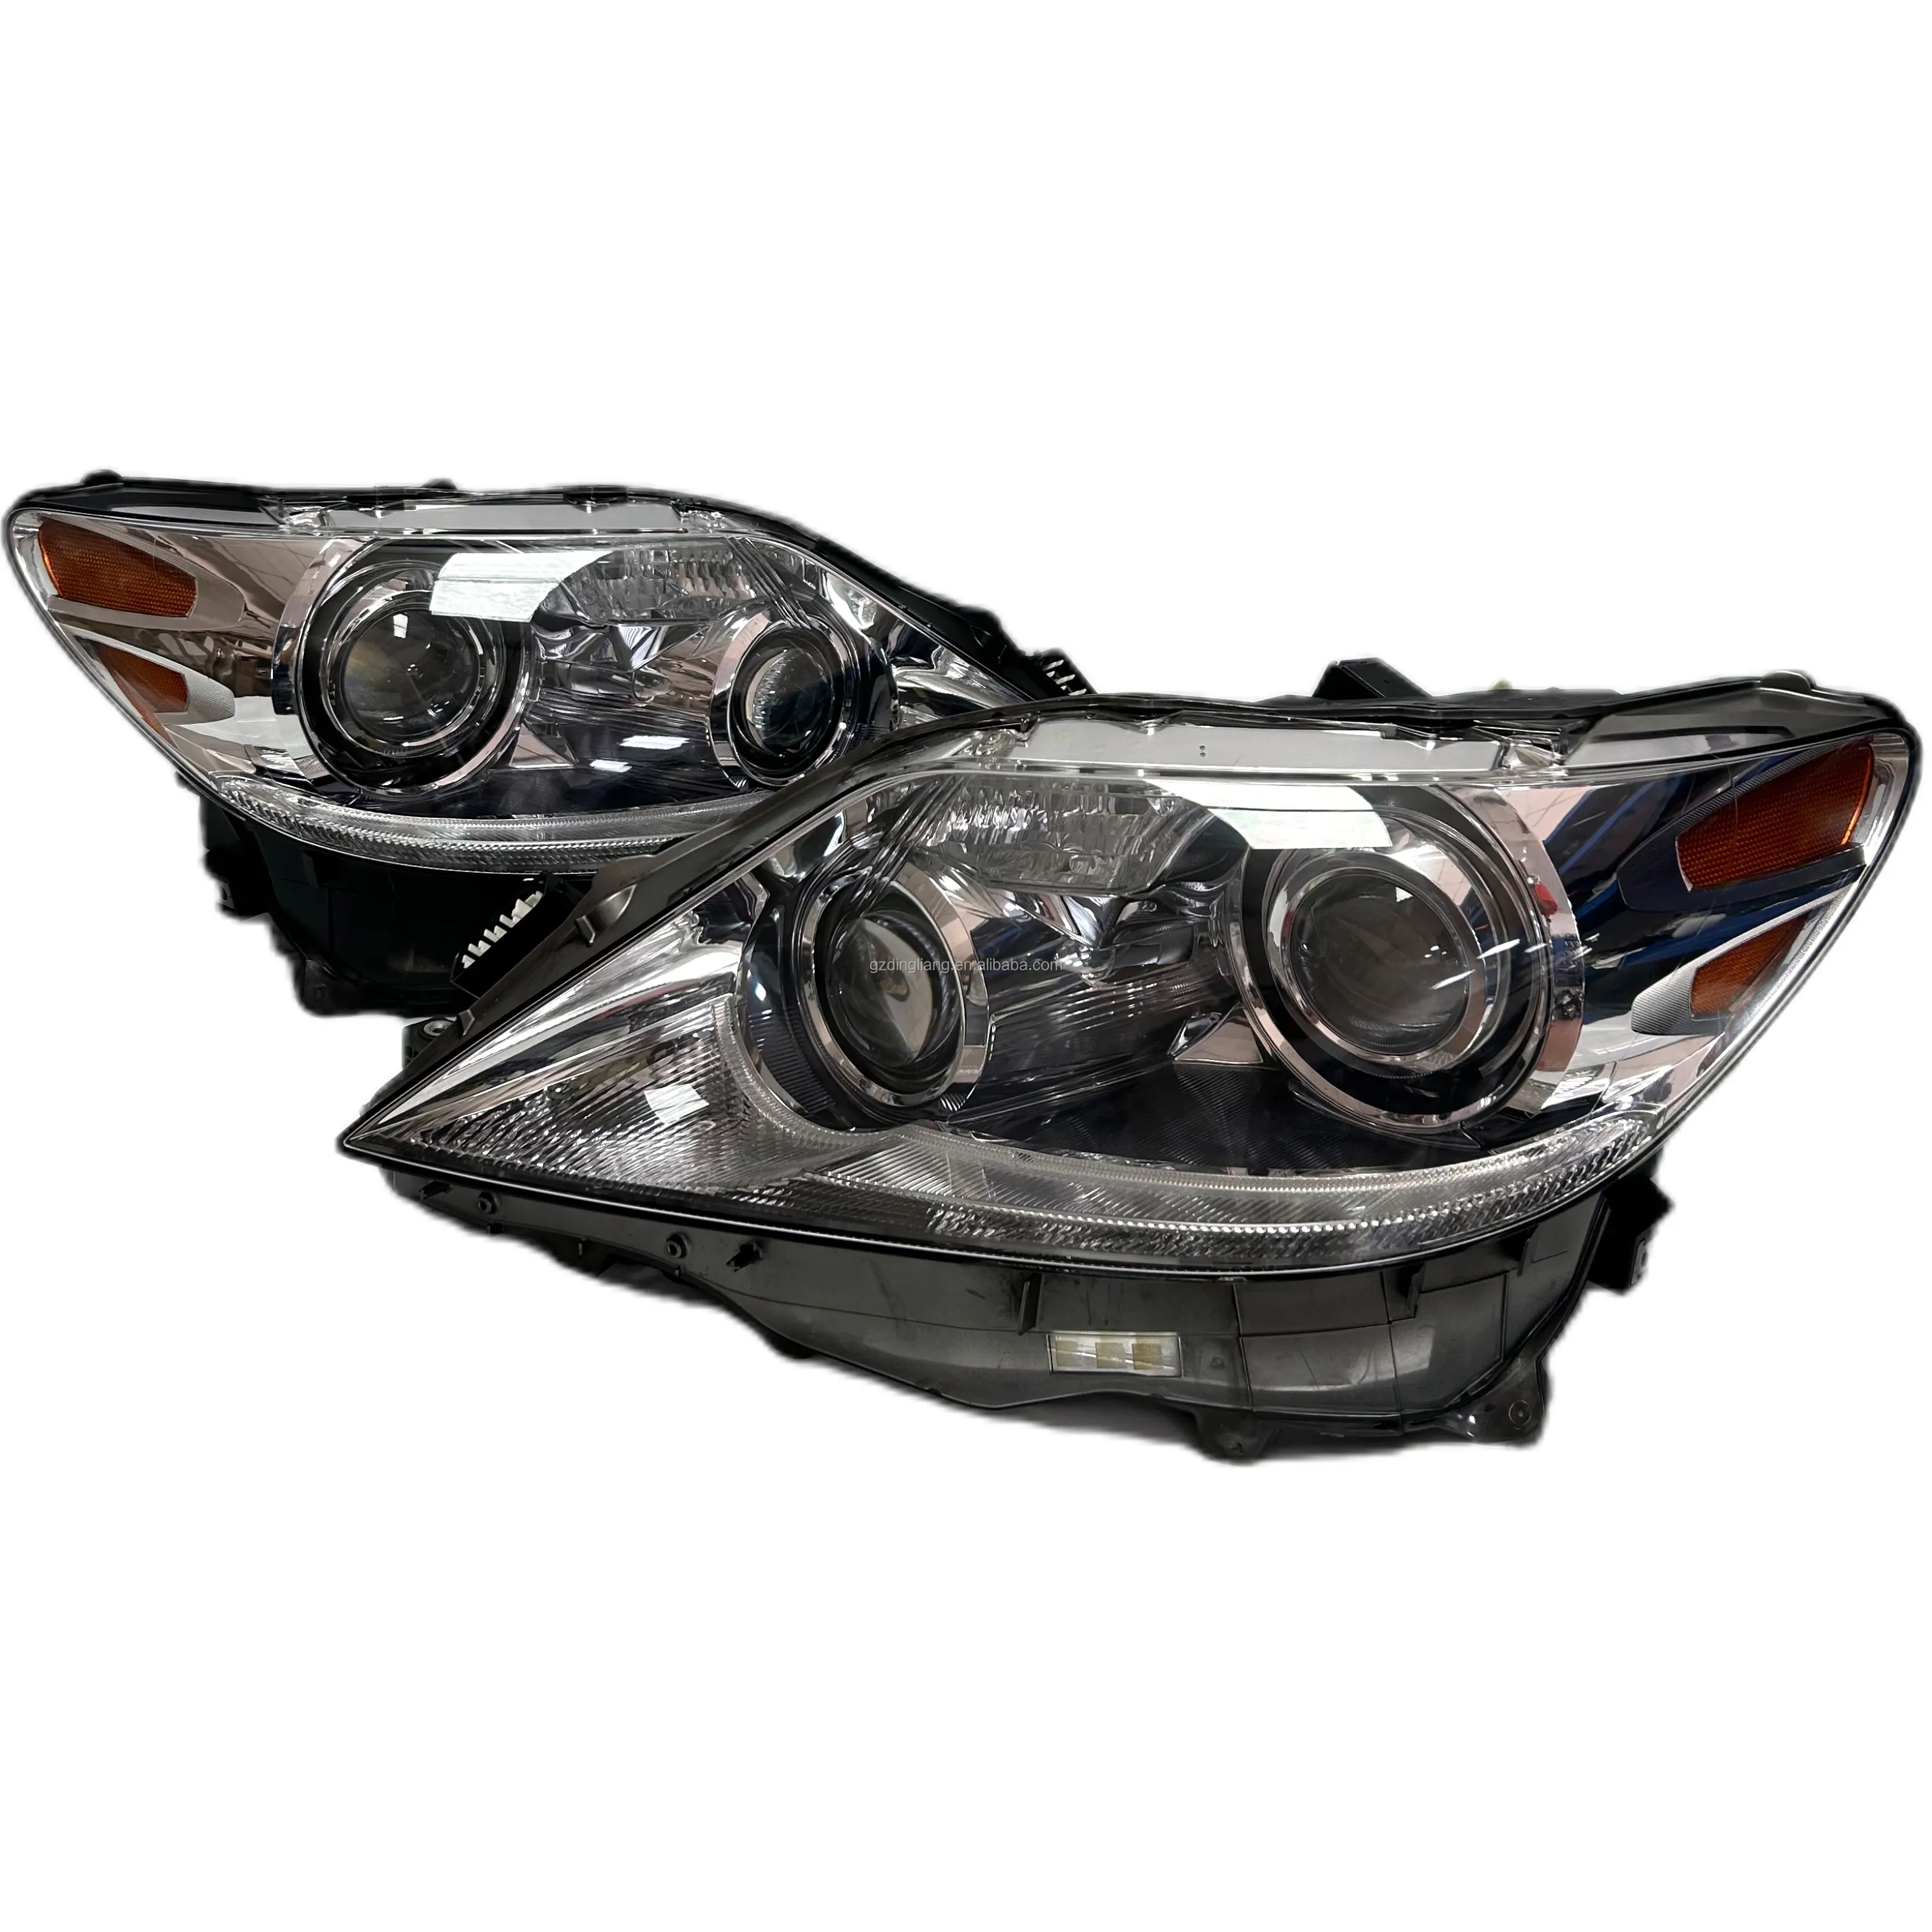 for Lexus LS460 LS600 front light bulb with three eye LED front light 2011 2012 2013 2014 Lexus LS series headlight assembly